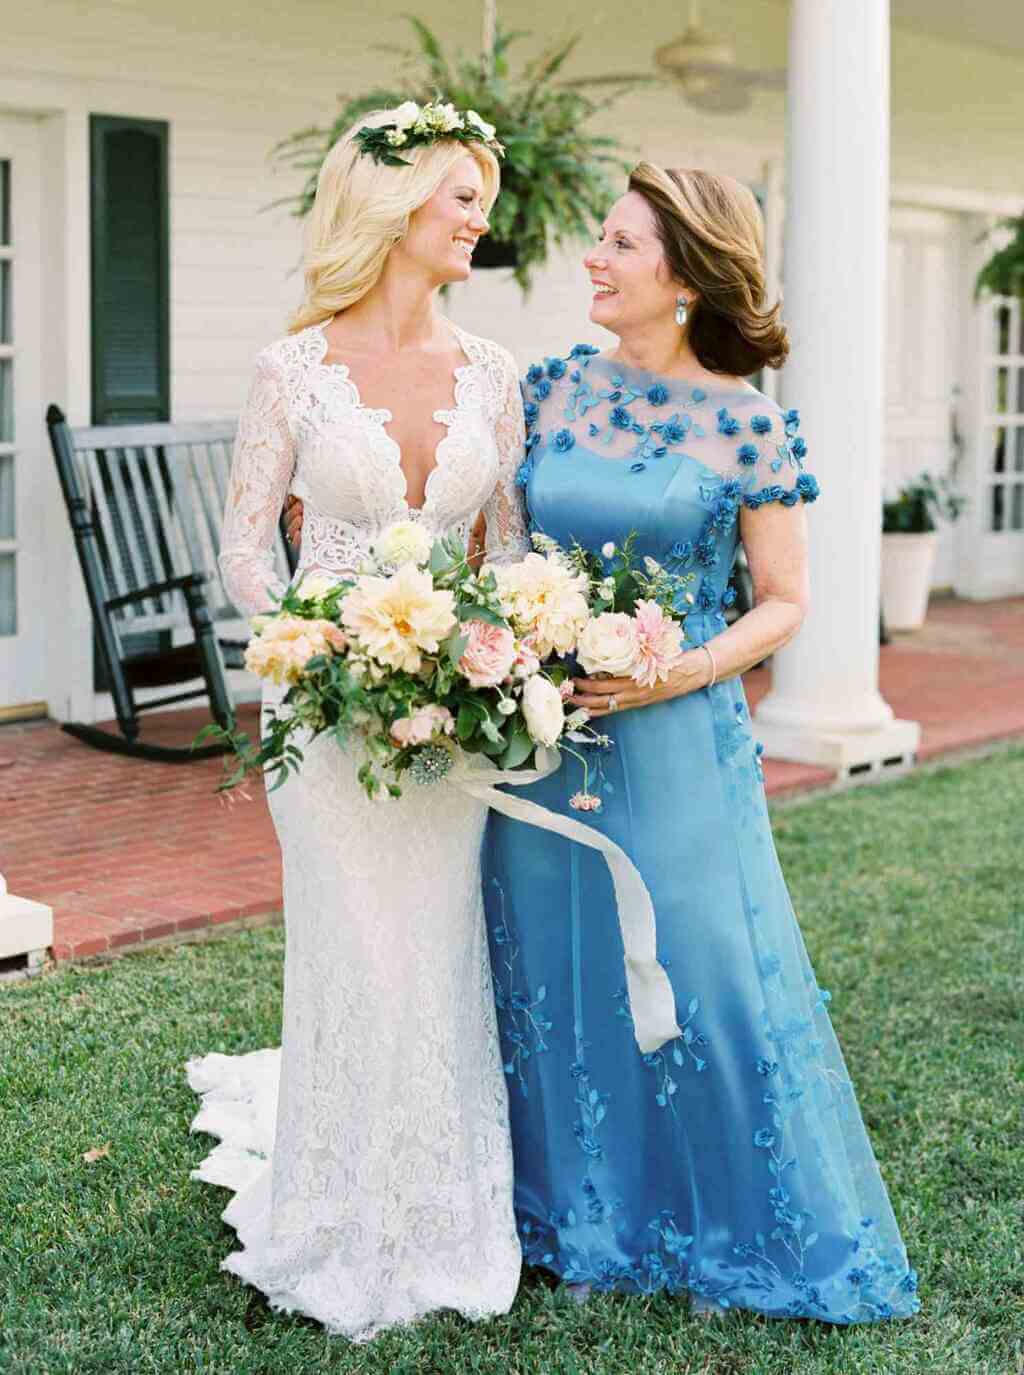 The Floral Dresses for Mothers of the Bride